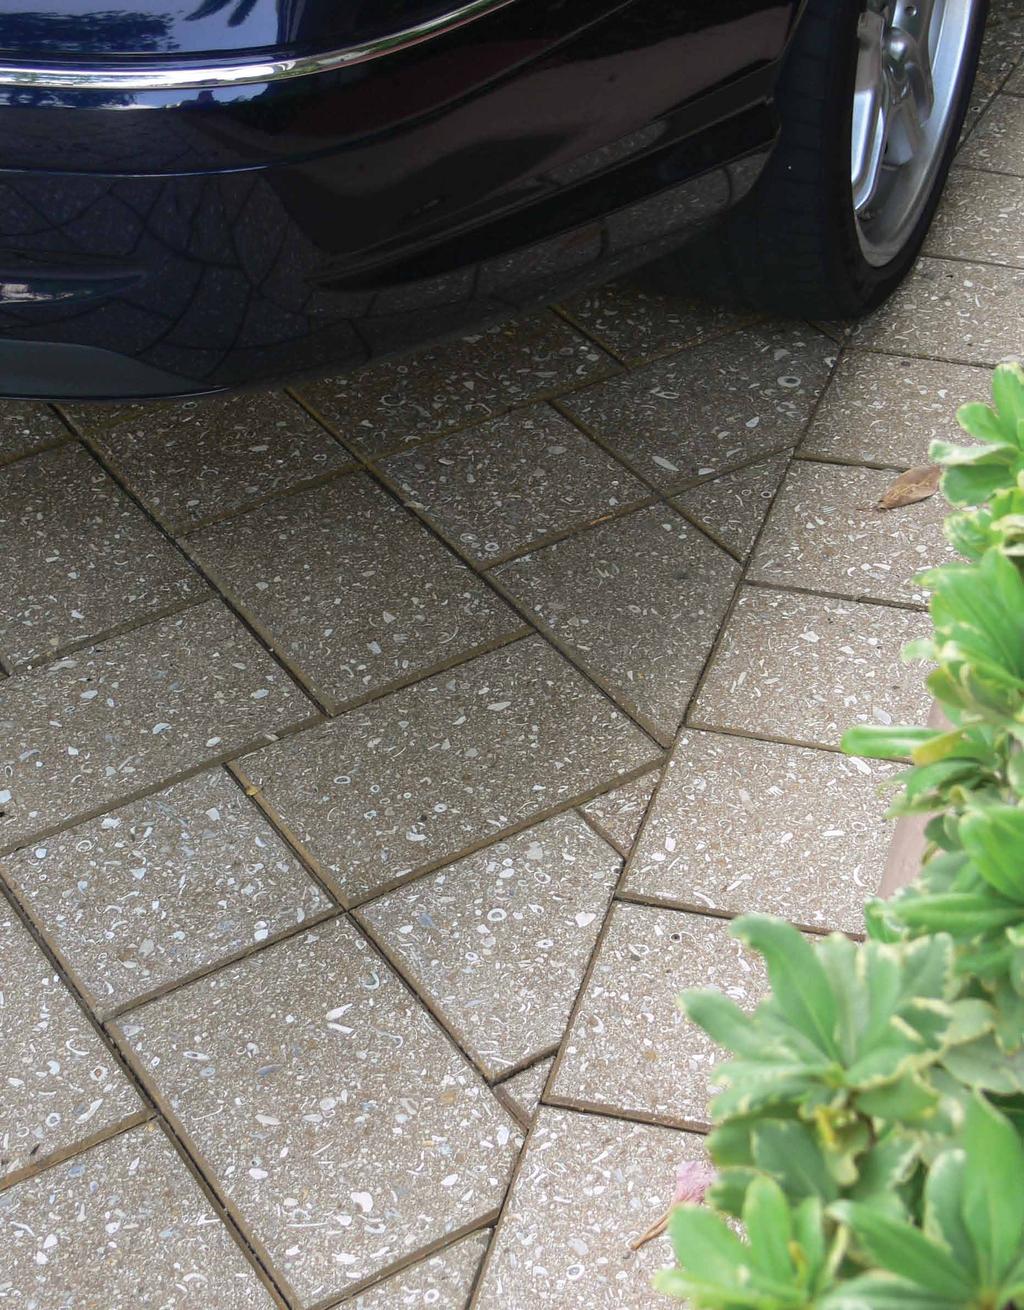 Here is why Architects, Landscape Designers and professional installers are using Artistic Roadlock pavers: The top portion of Roadlock pavers are polished to eliminate the